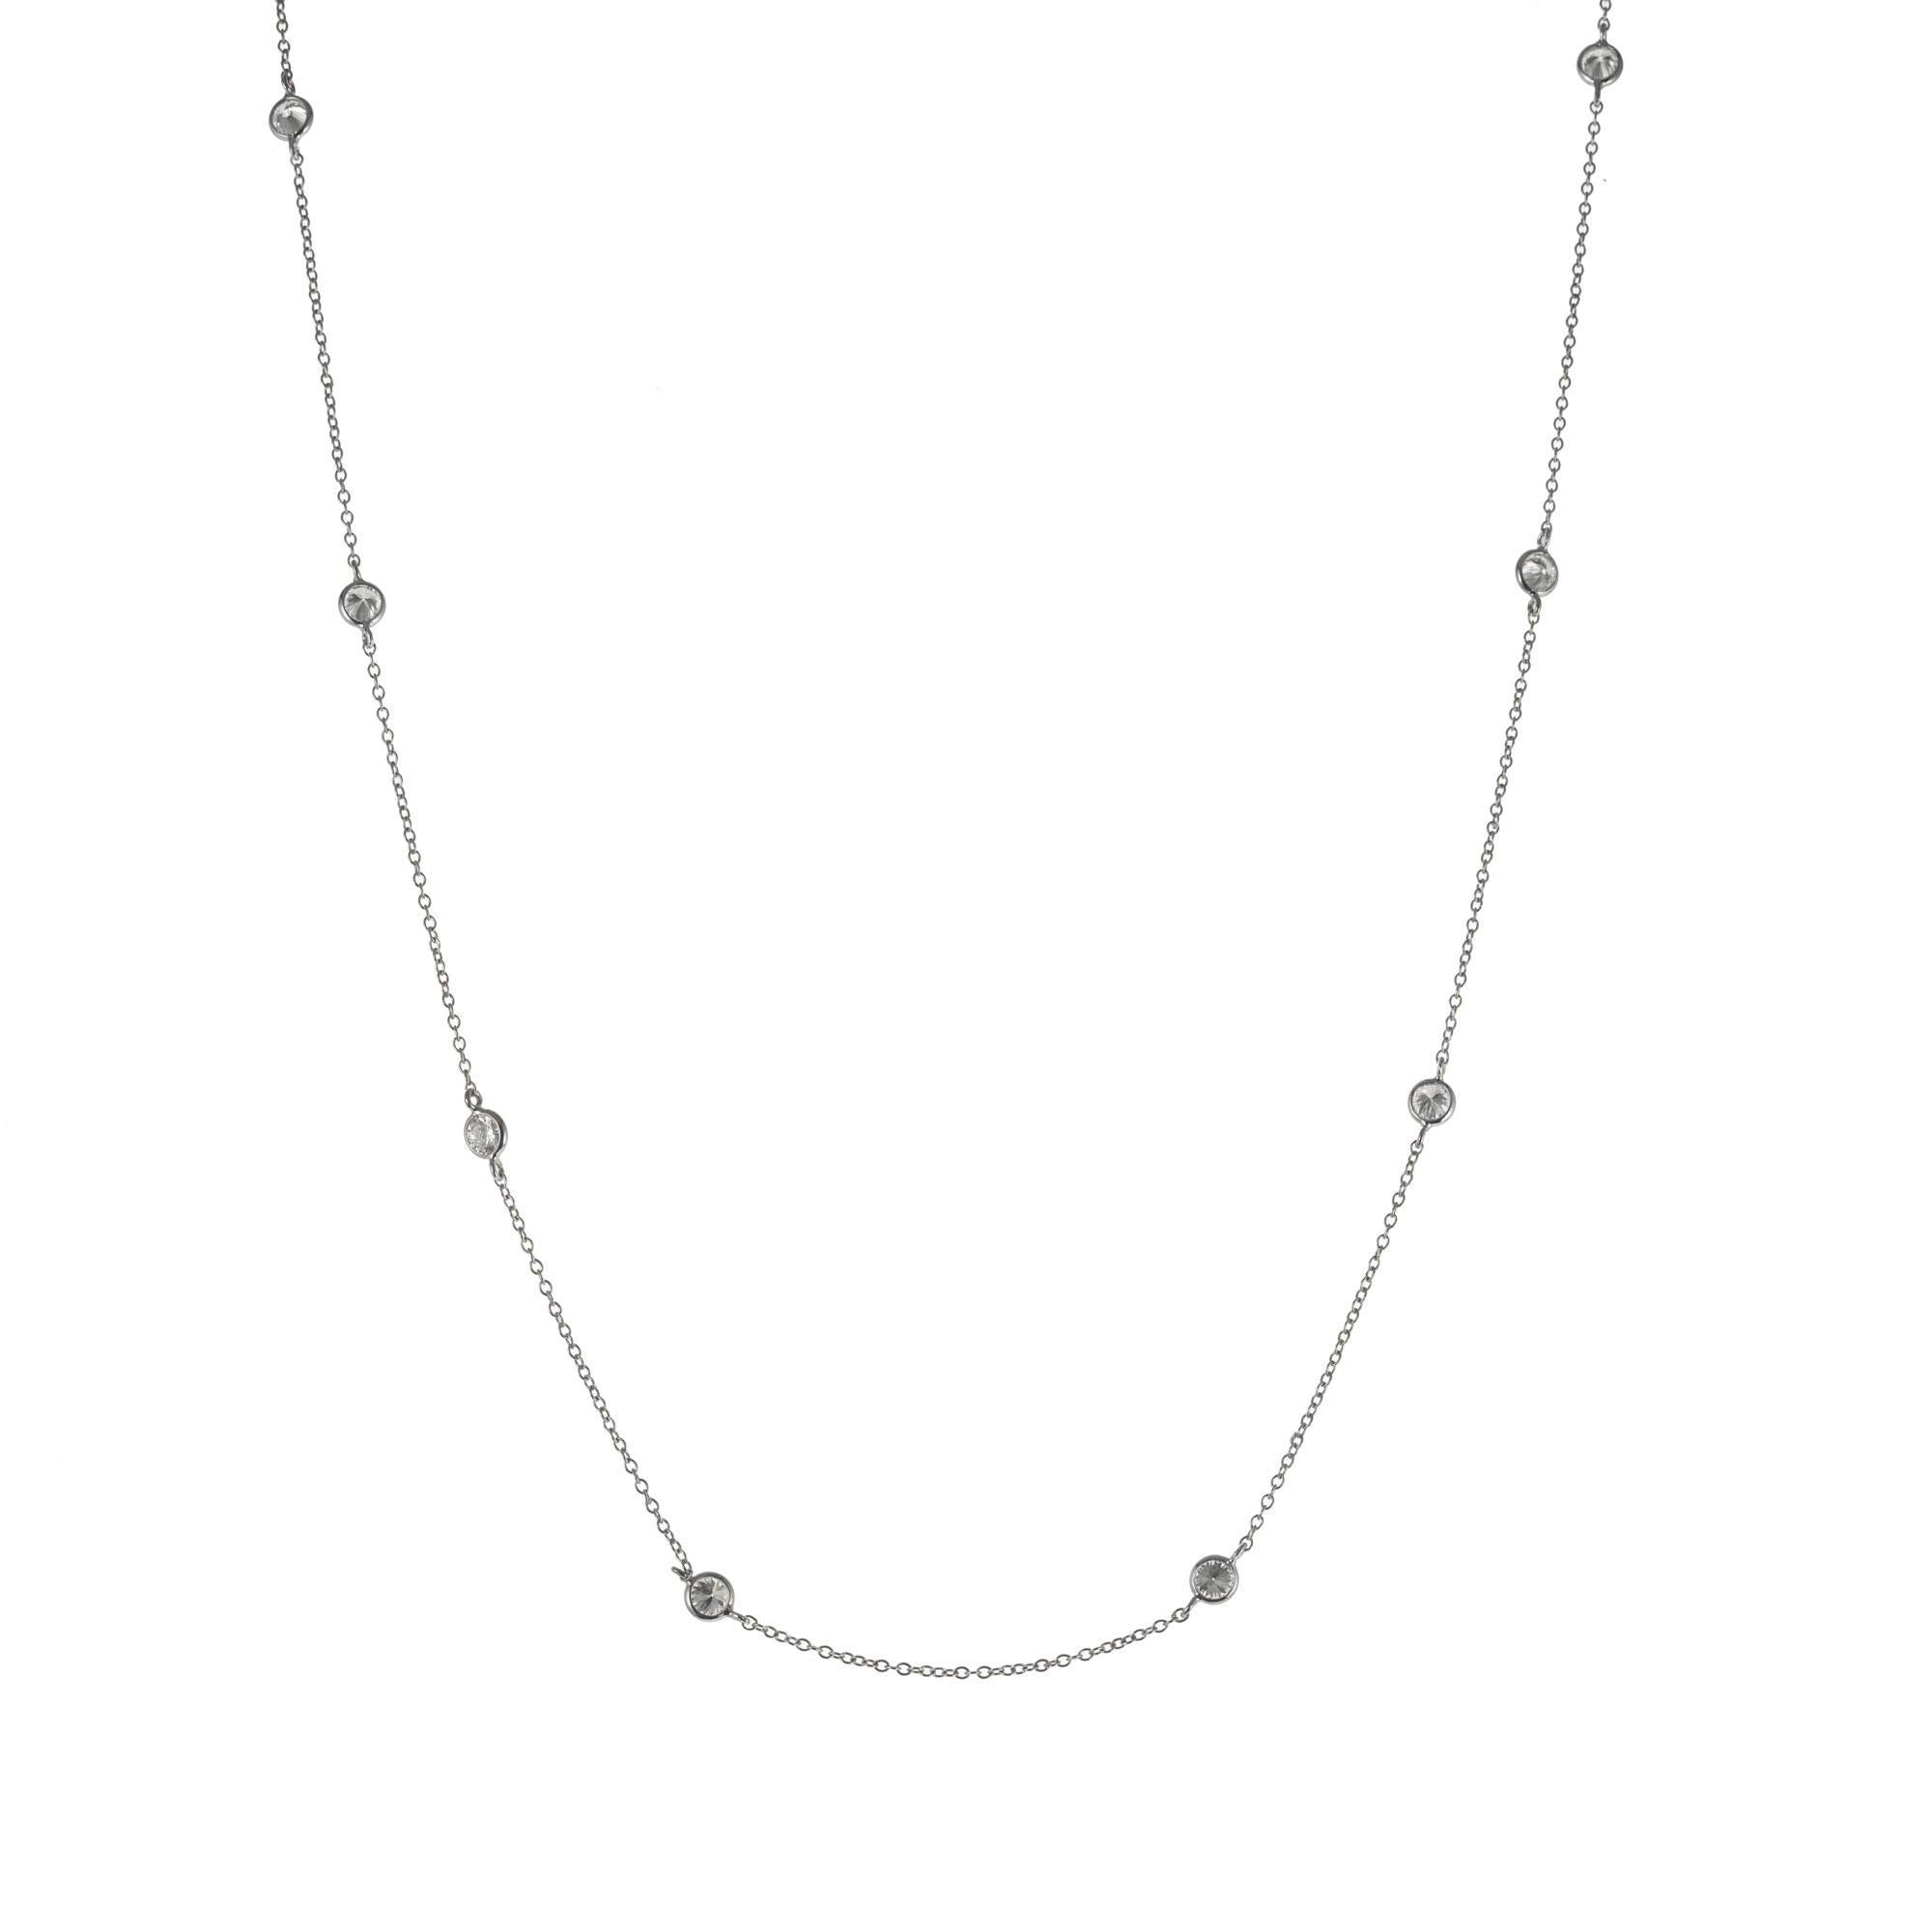 Round Cut Peter Suchy 1.40 Carat Diamond by the Yard White Gold Necklace For Sale